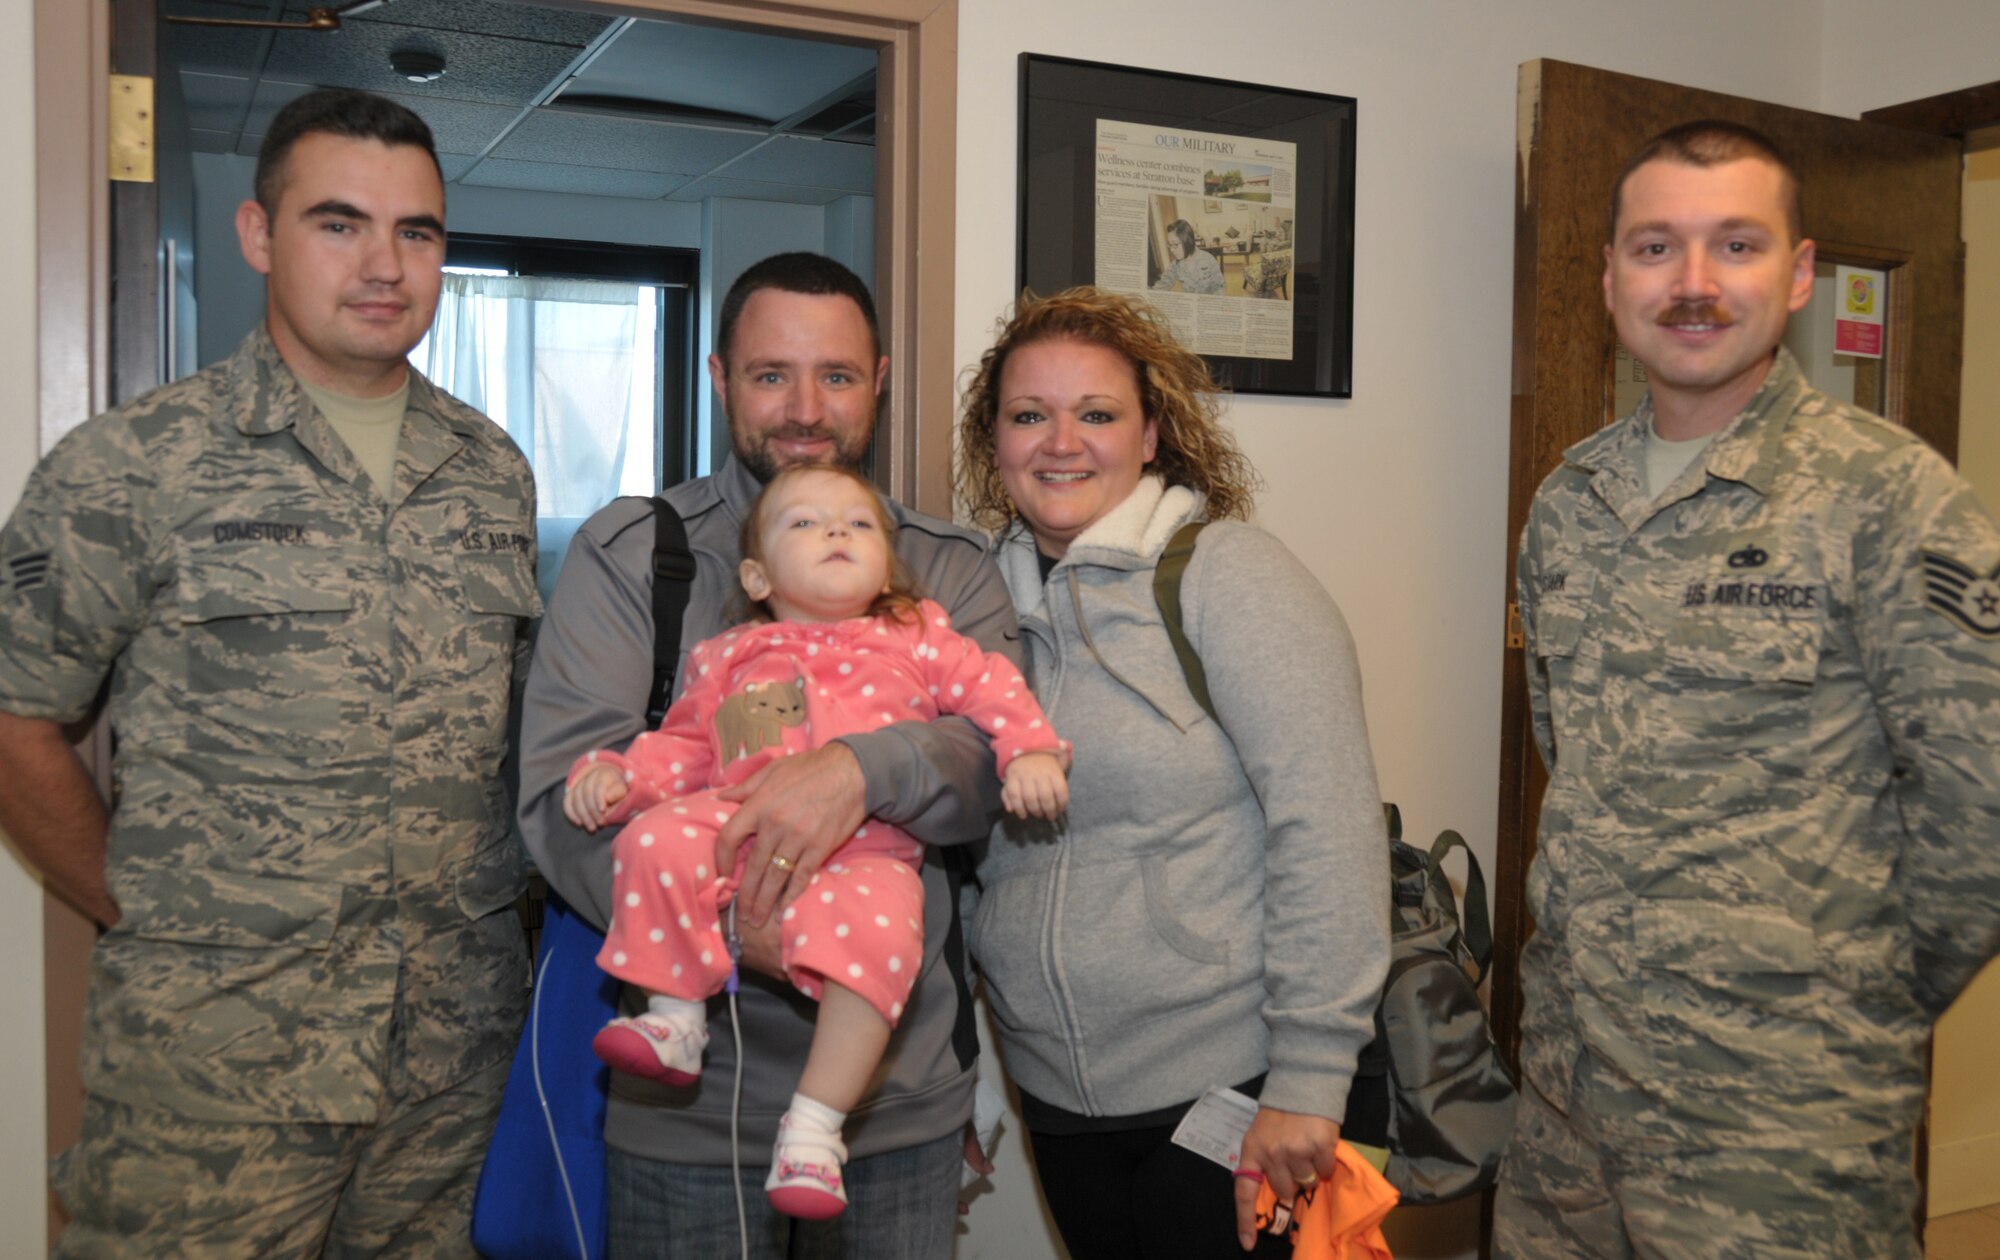 Senior Airman James Comstock (left) and Staff Sgt. Jason Stark (right) presented a check of $500 on behalf of the 109th Airlift Wing's First Six Council to the LeClaire family, Gene, Dena and 22-month-old Sophia. Sophia has cerebral palsy, and the council raised money  during the wing's recent Family Day to help with her medical expenses. (U.S. Air National Guard photo by Tech. Sgt. Catharine Schmidt/Released)